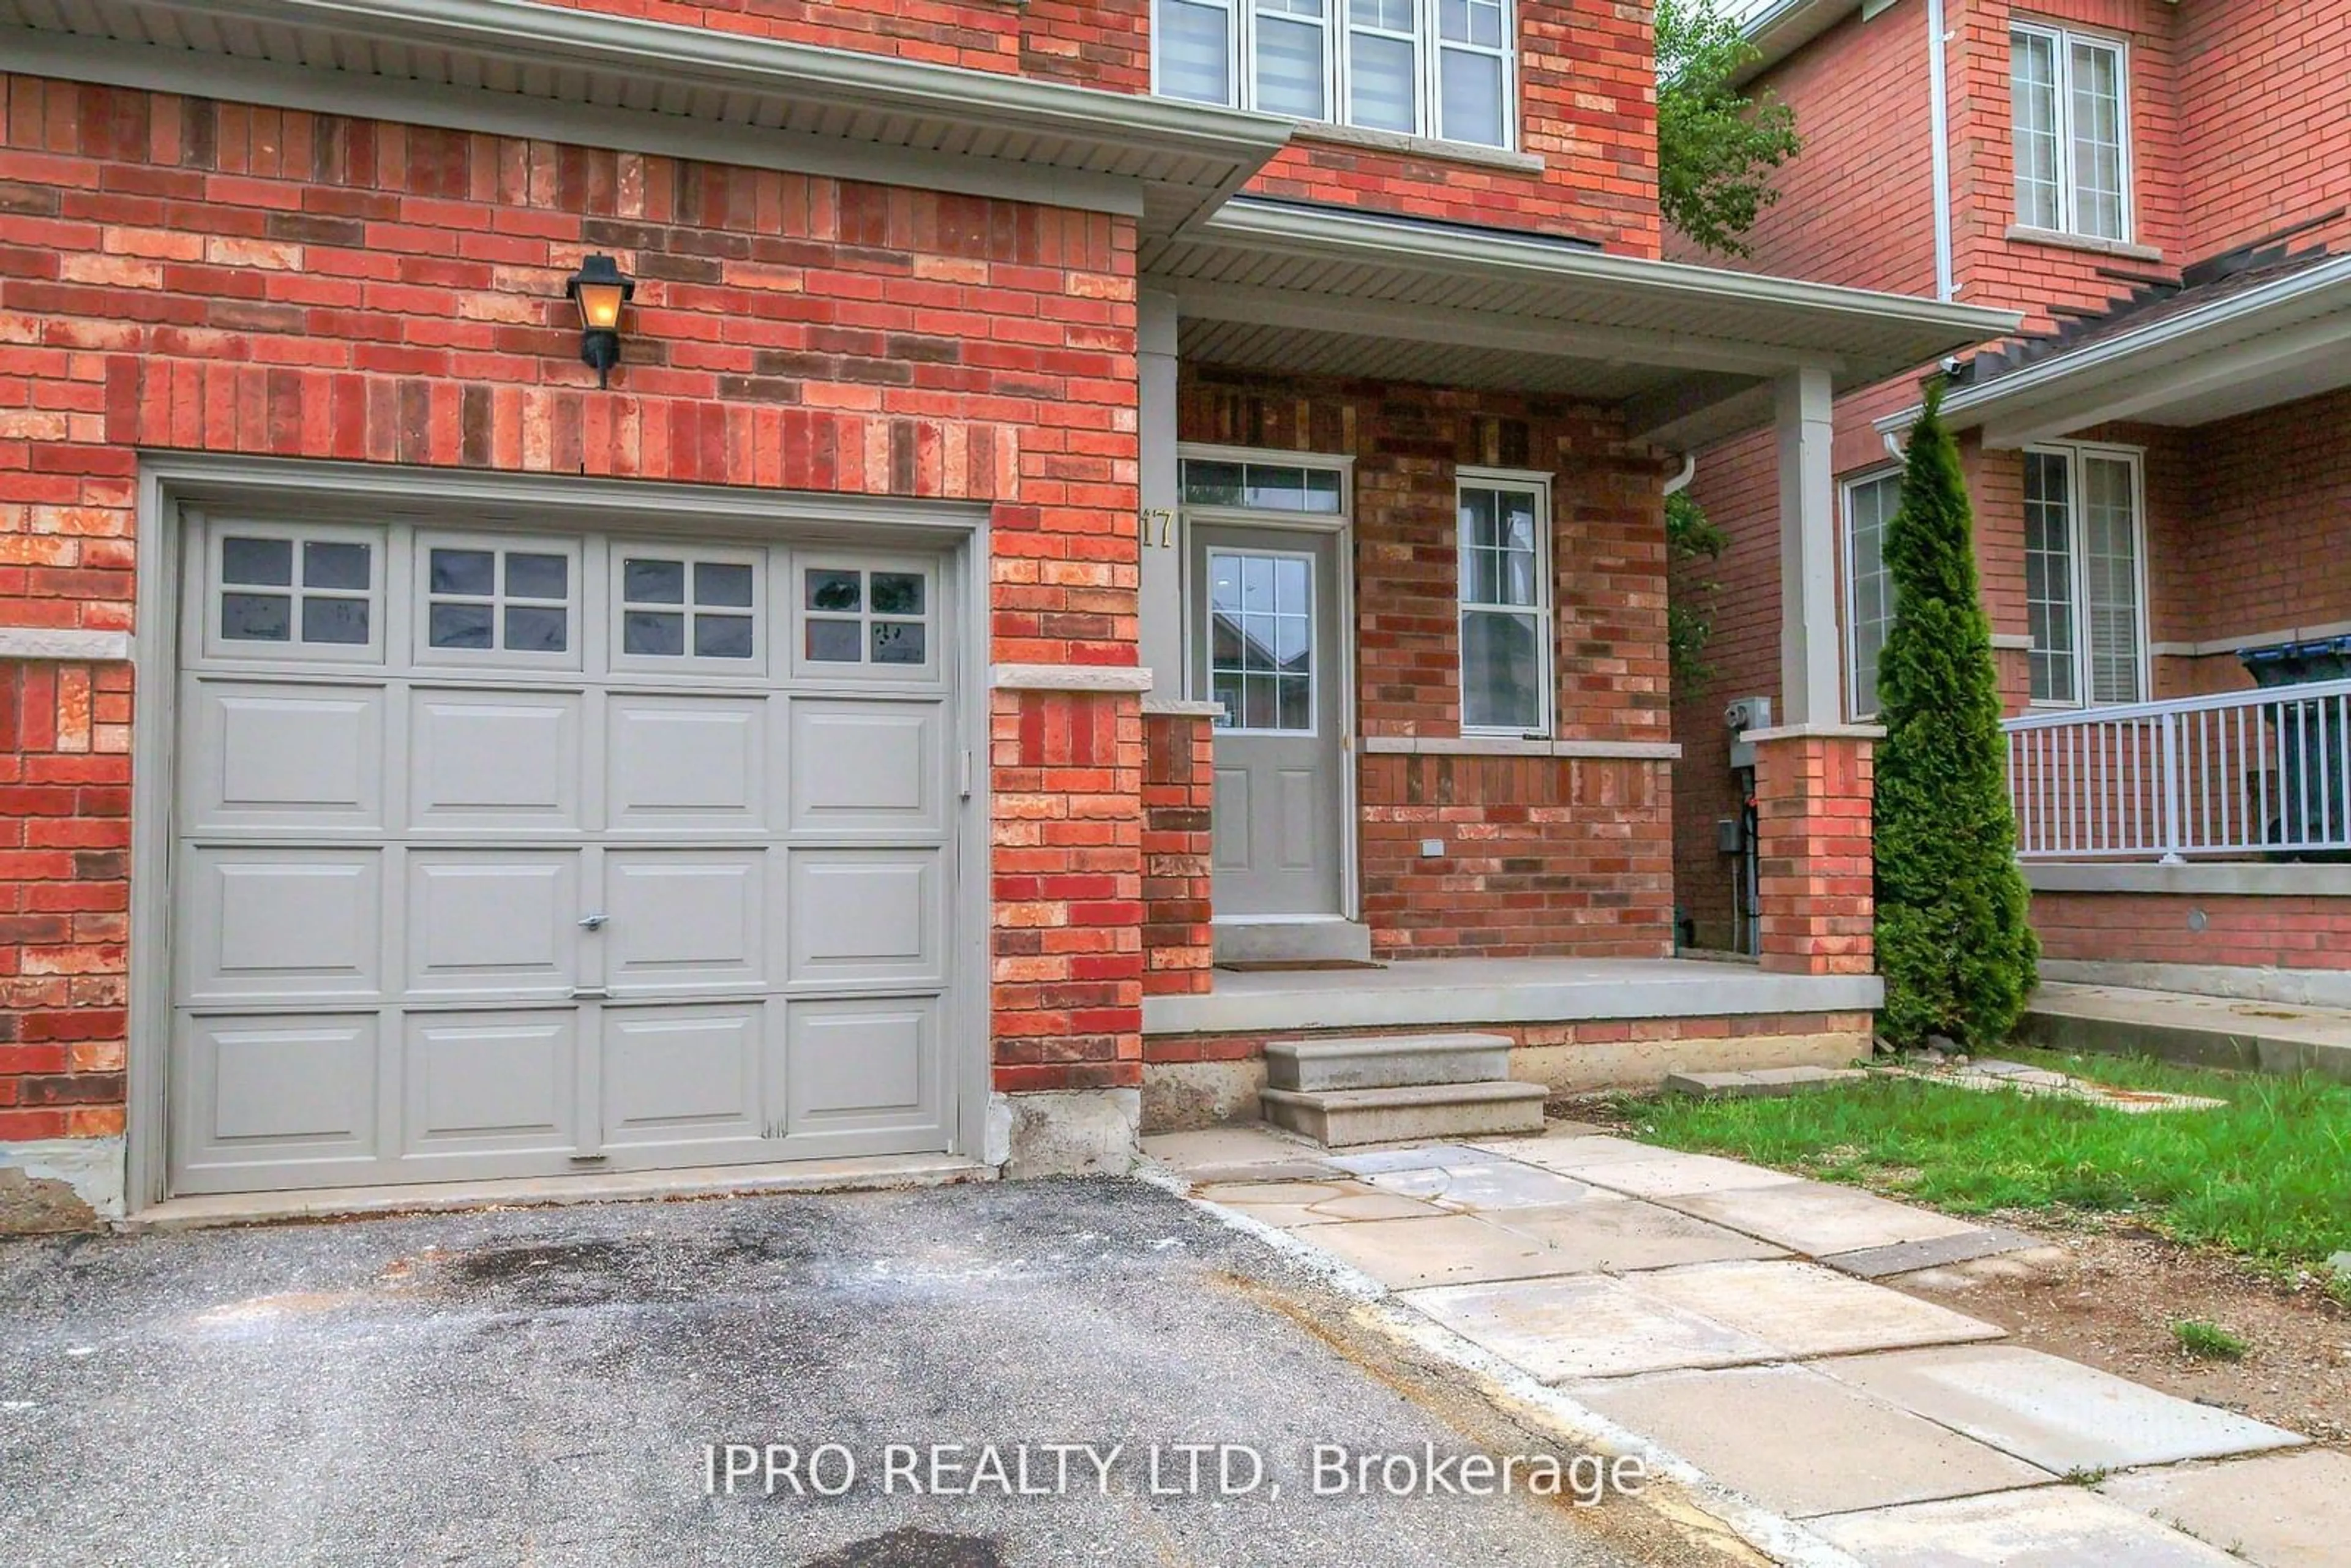 Home with brick exterior material for 17 Prudhomme Dr, Brampton Ontario L6R 0H2